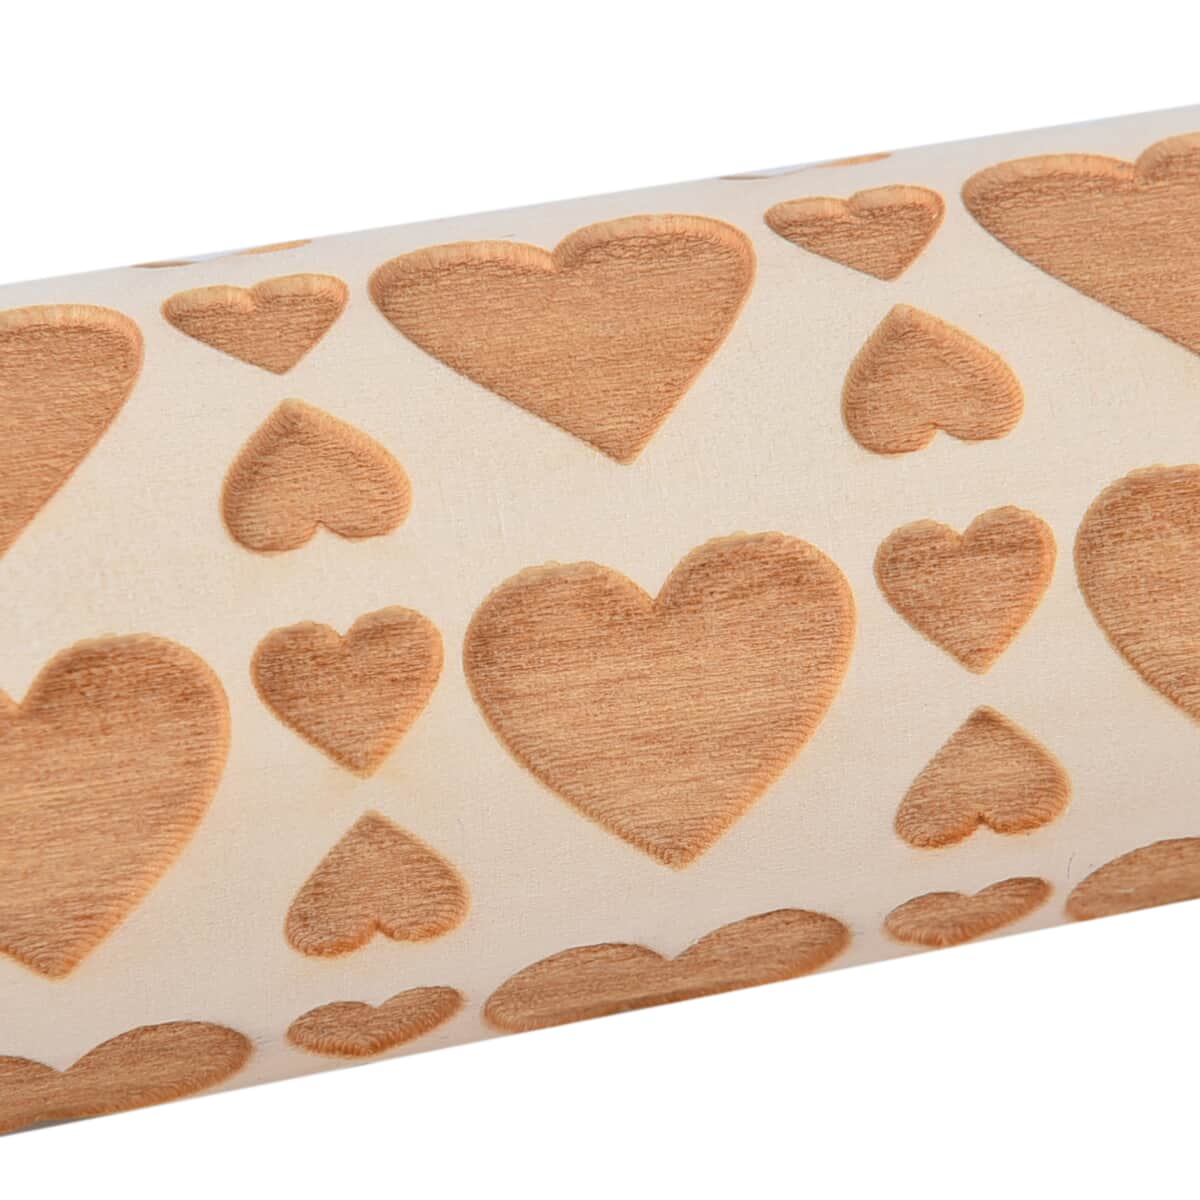 "rolling pin (heart) Material: wood Size:35x4.5cm cm/13.78x1.77 inch Weight: 180g Colour: wood" image number 5